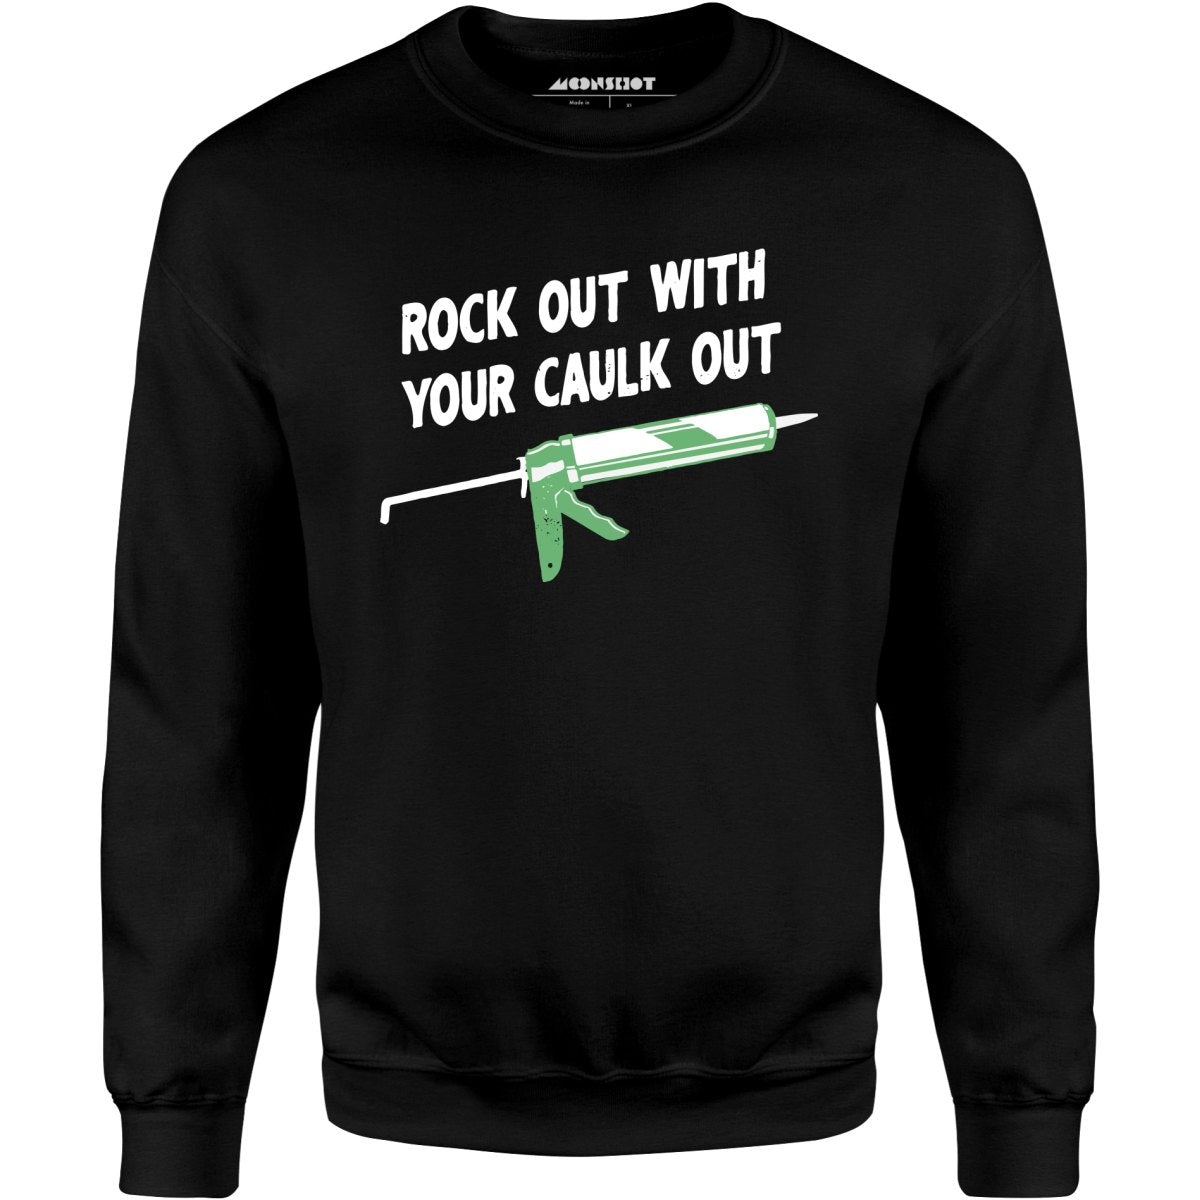 Rock Out With Your Caulk Out - Unisex Sweatshirt